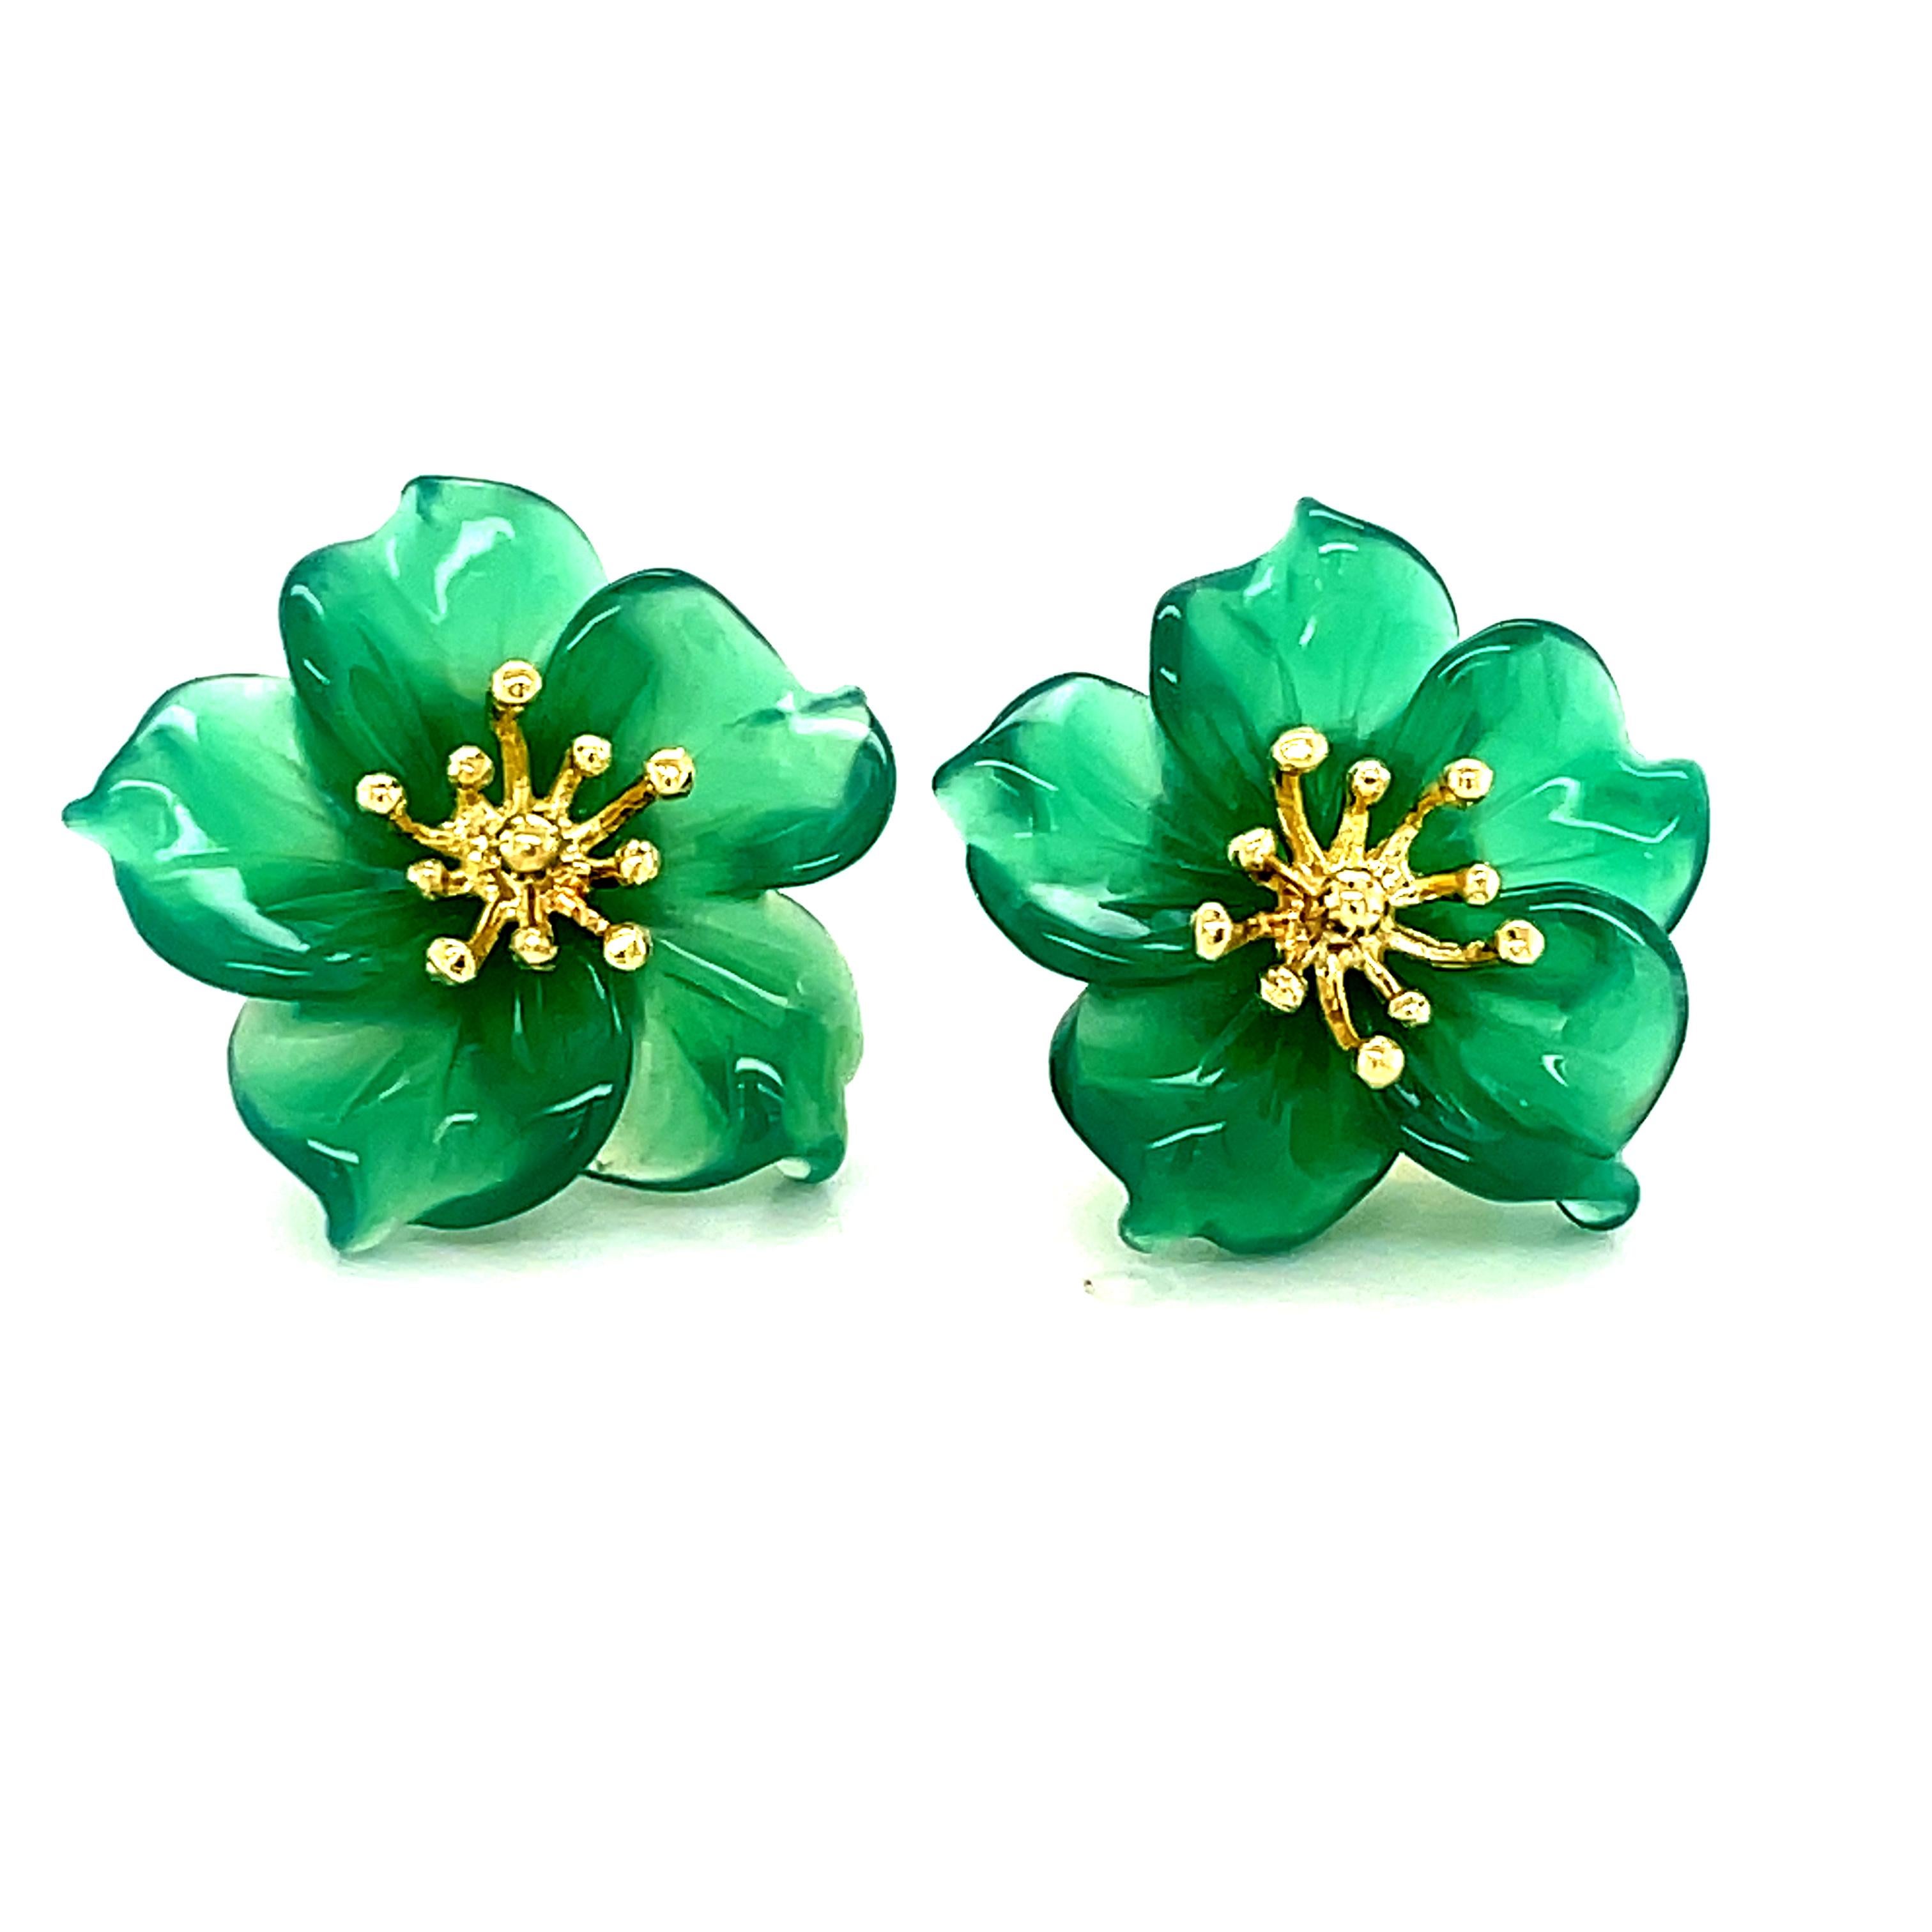 
These finely hand-carved green agate earrings are the perfect color for any season! 3-dimensional flowers were intricately carved from beautifully translucent green agate quartz and look stunning paired with our 18 karat yellow gold post earrings.